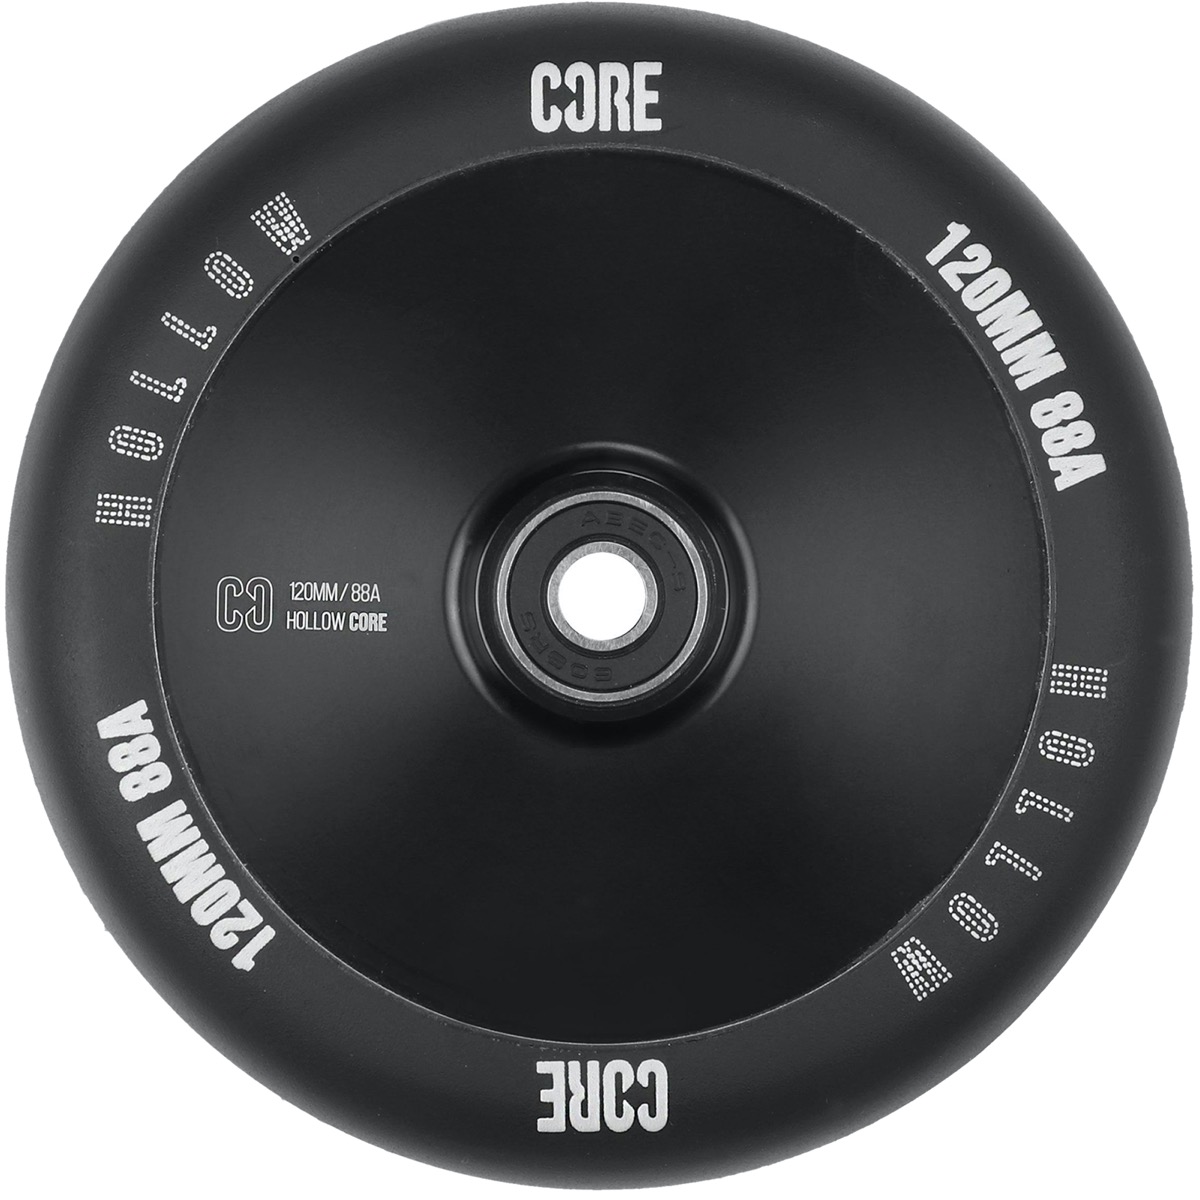 An image of CORE Hollow Core V2 120mm Scooter Wheels - Black